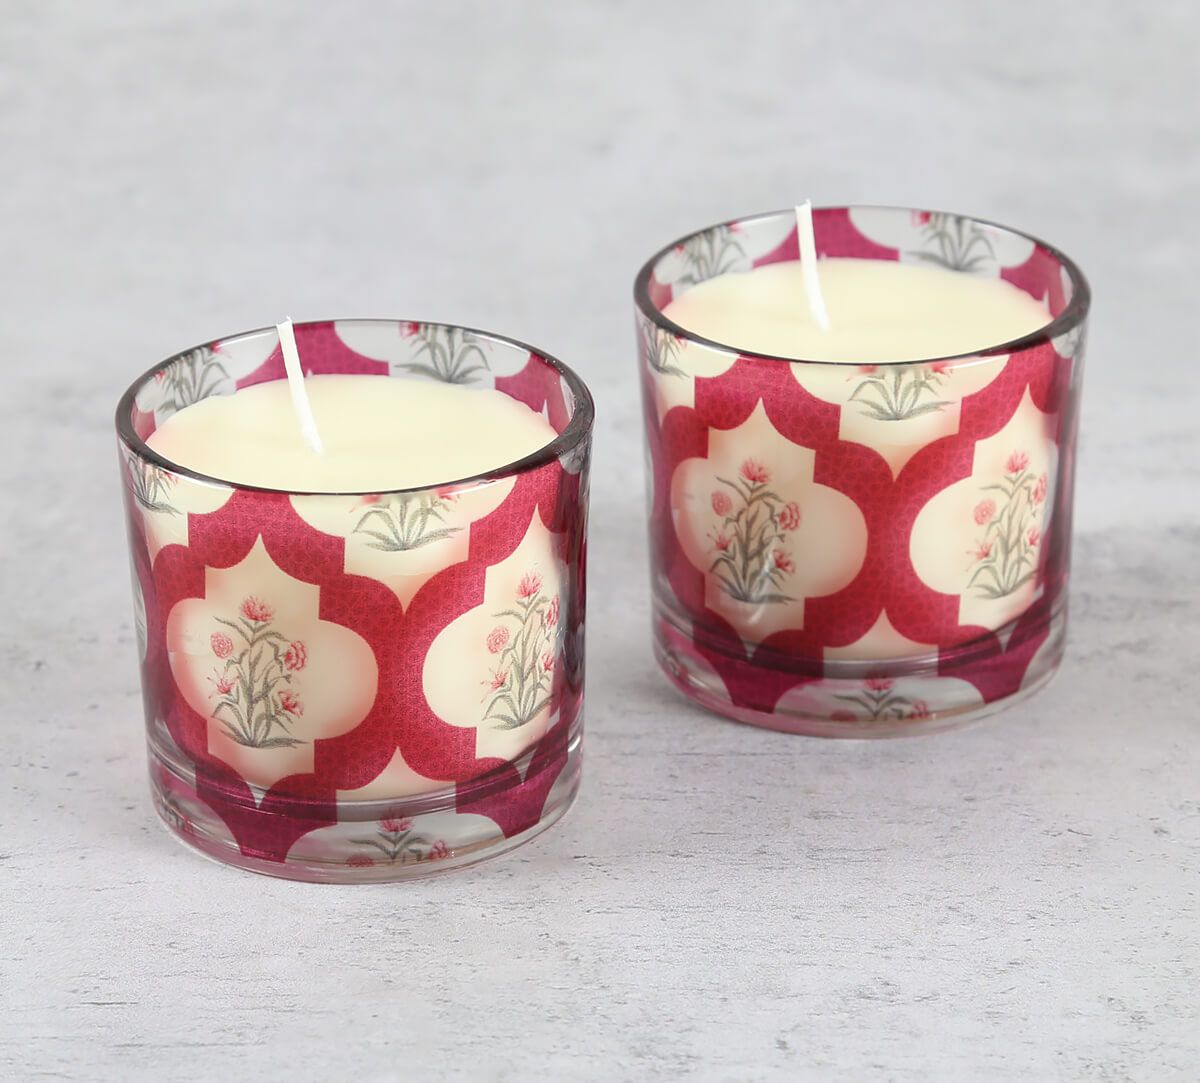 India Circus by Krsnaa Mehta Poppy Flower Scarlet Cylindrical Candle Votive Set of 2